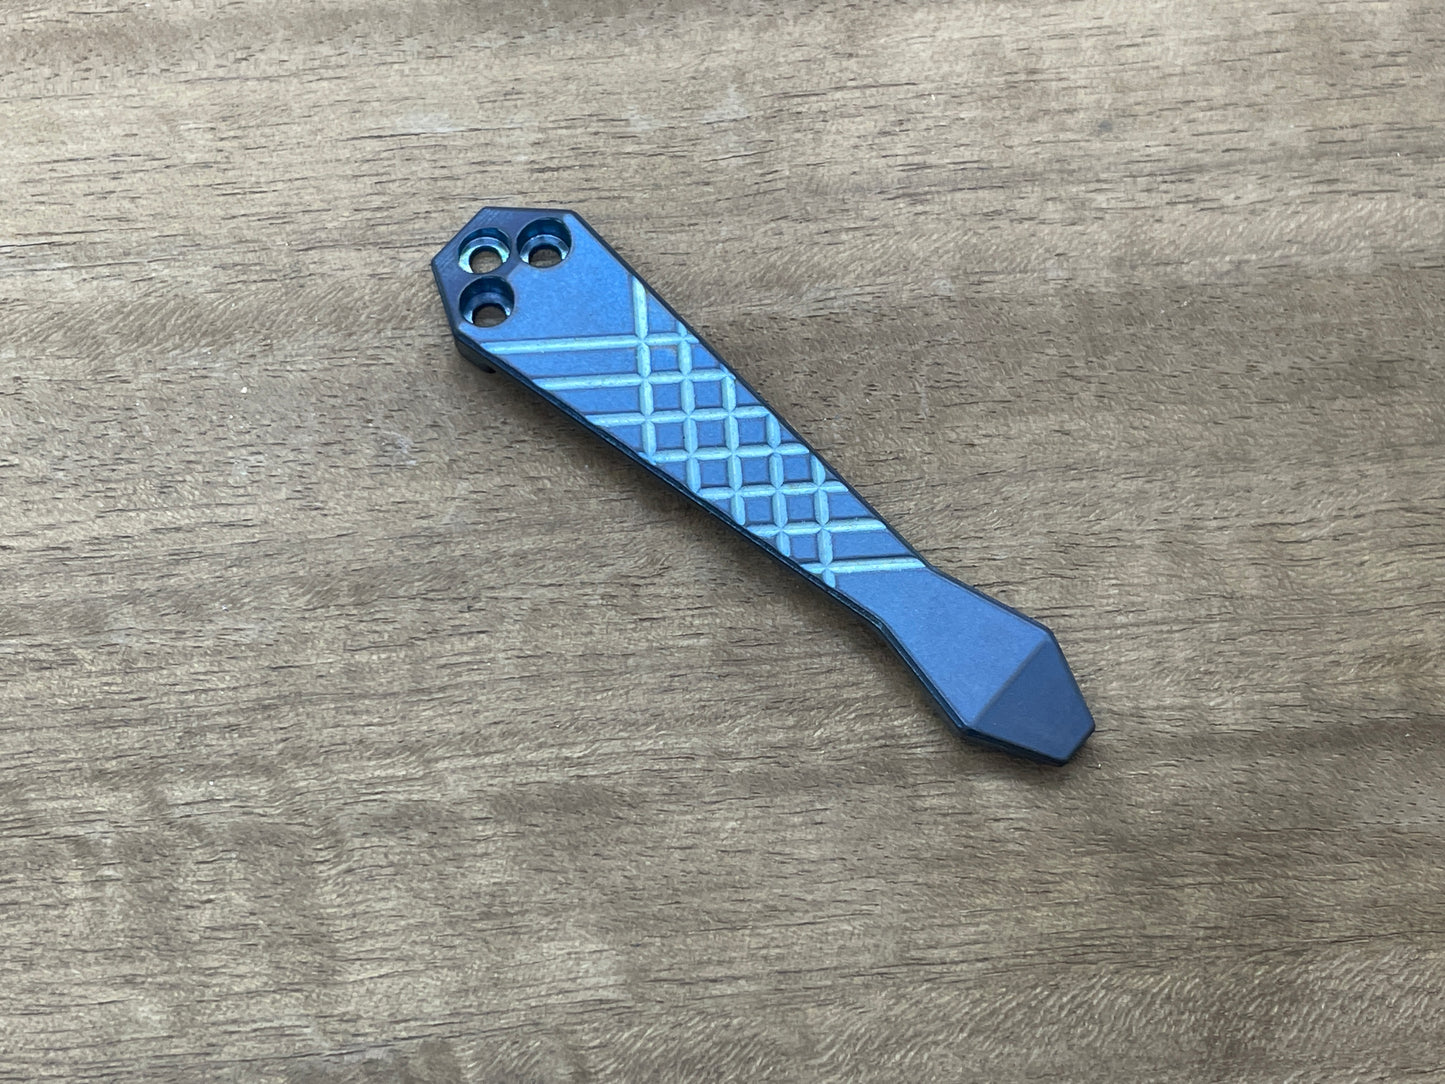 Tumbled Blue Ano FRAG Cnc milled Titanium CLIP for most Spyderco models